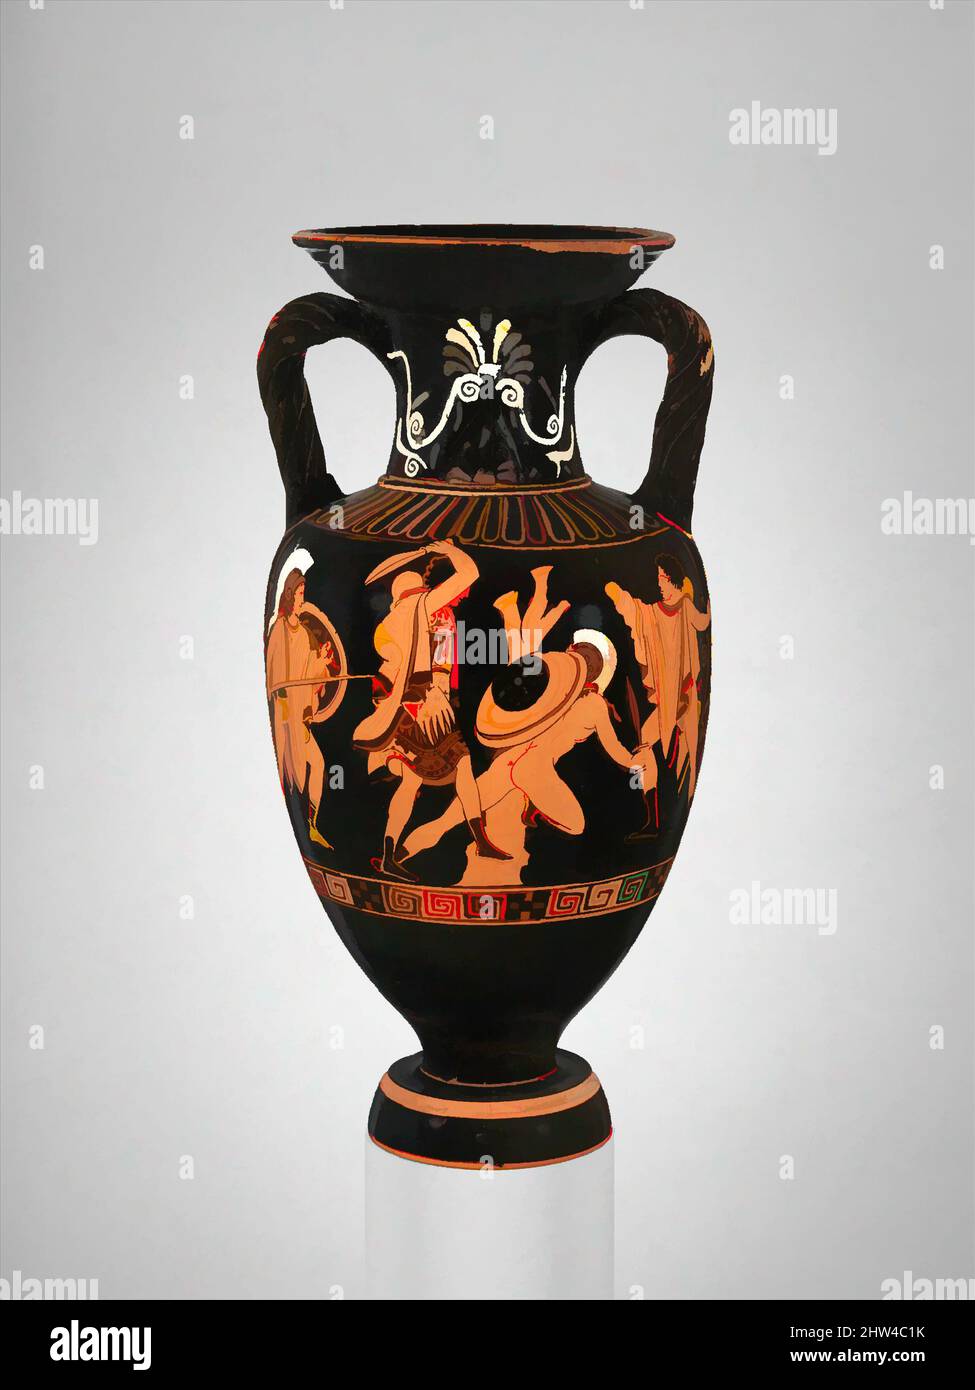 Art inspired by Terracotta neck-amphora (jar) with twisted handles, Classical, ca. 400 B.C., Greek, Attic, Terracotta; red-figure, H. 14 in. (35.5 cm), Vases, Obverse, combat of Greeks against Amazons, Reverse, satyr and maenad, followers of Dionysos, the god of wine, Classic works modernized by Artotop with a splash of modernity. Shapes, color and value, eye-catching visual impact on art. Emotions through freedom of artworks in a contemporary way. A timeless message pursuing a wildly creative new direction. Artists turning to the digital medium and creating the Artotop NFT Stock Photo